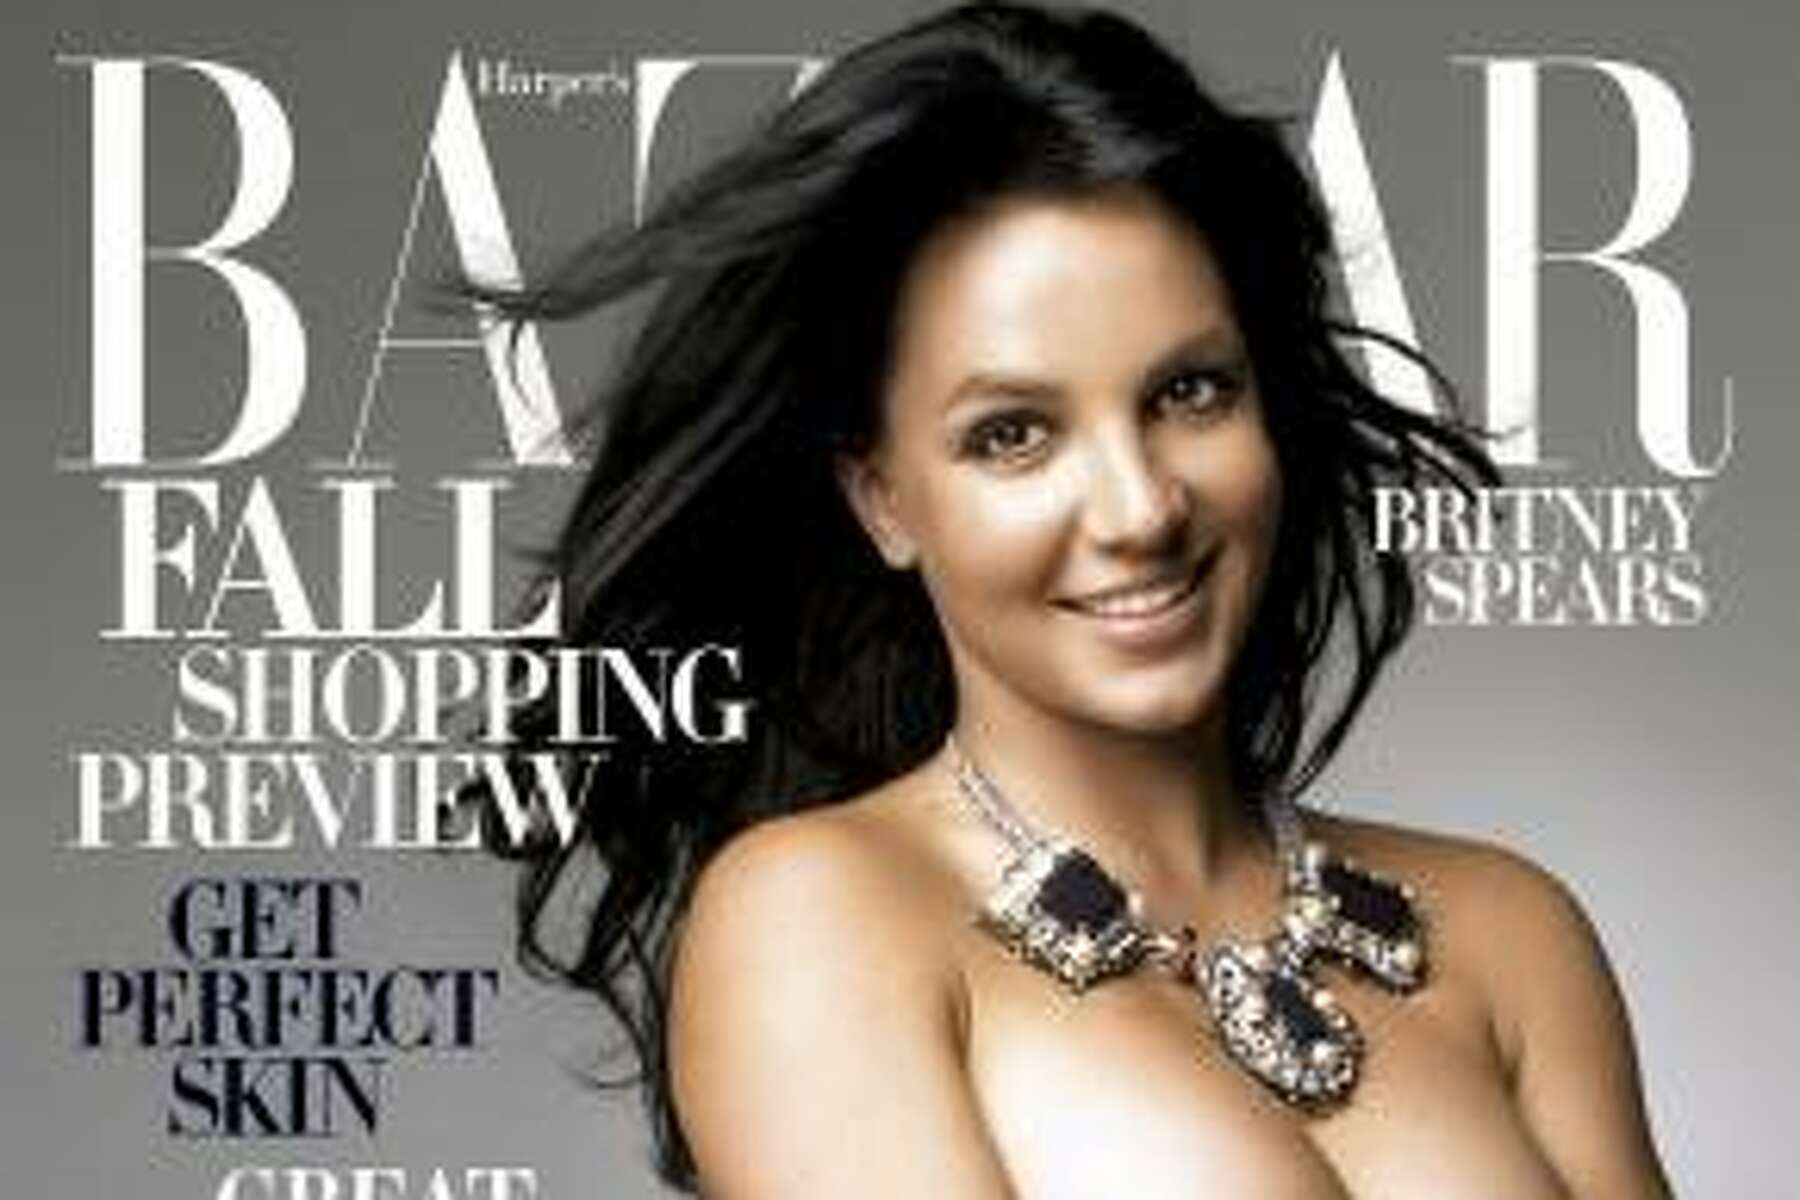 1800px x 1200px - Pregnant Spears poses nude for Harper's Bazaar cover